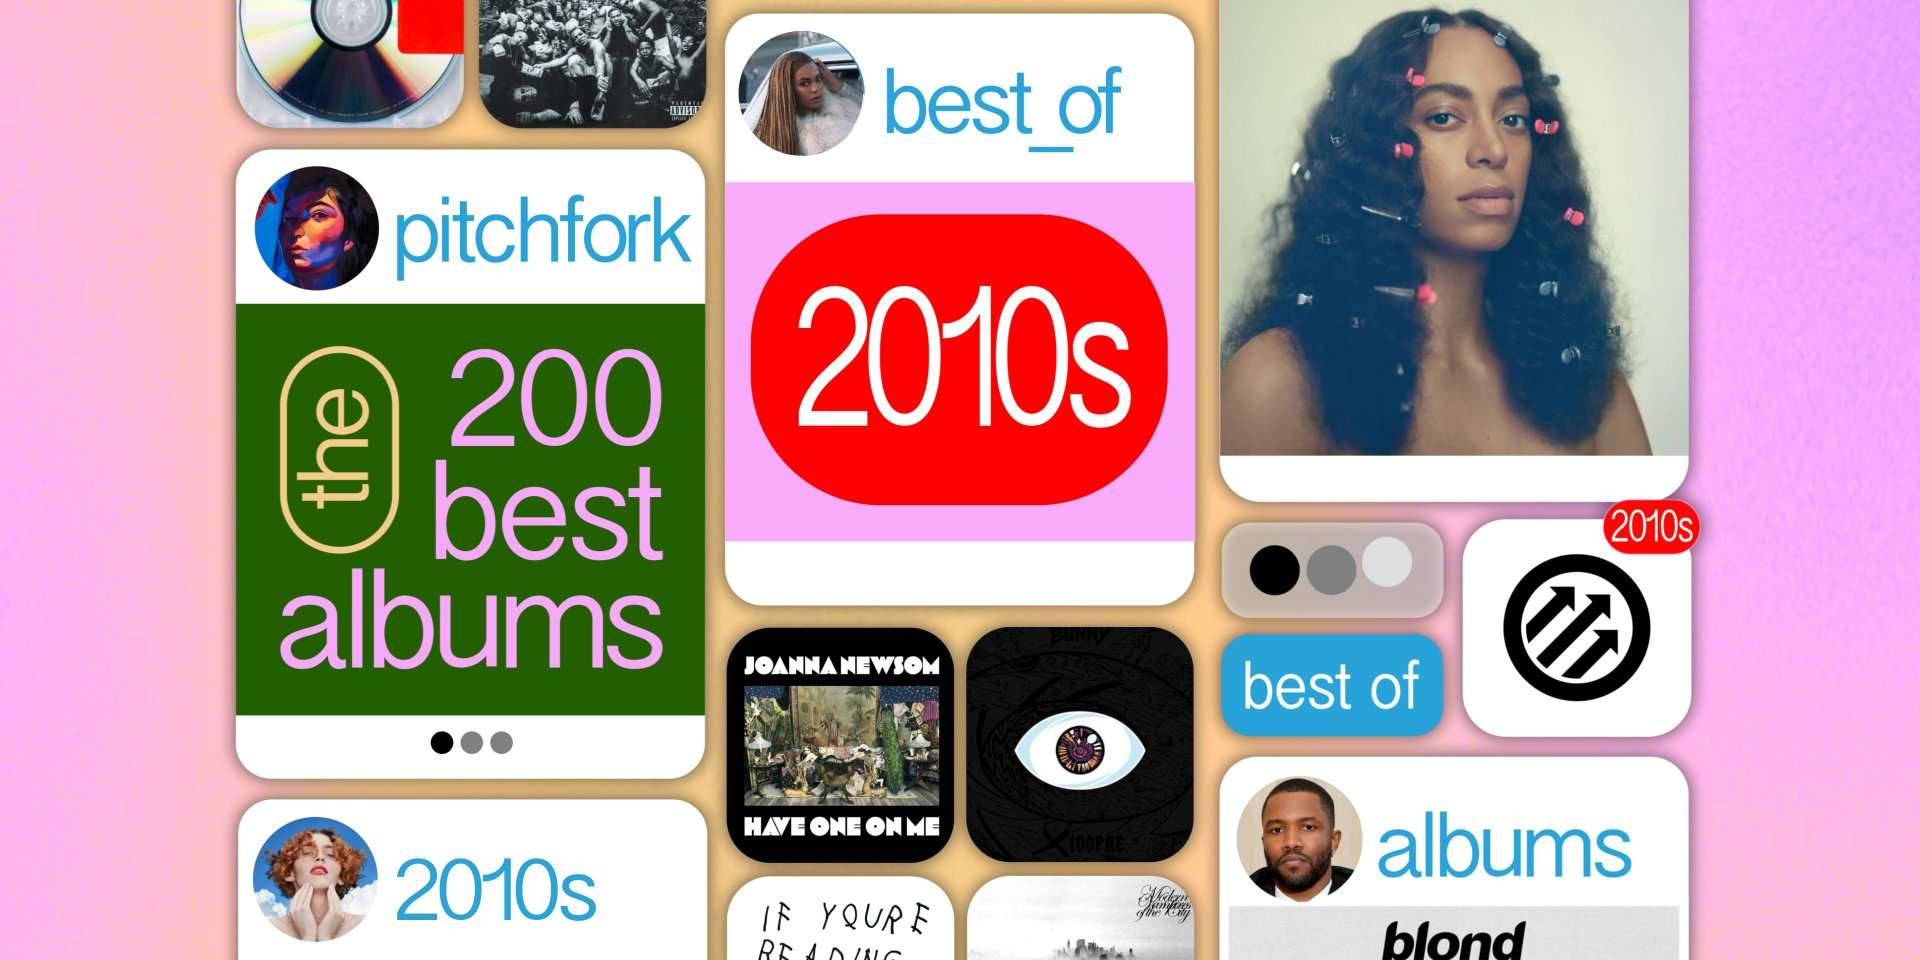 image for The 200 Best Albums of the 2010s